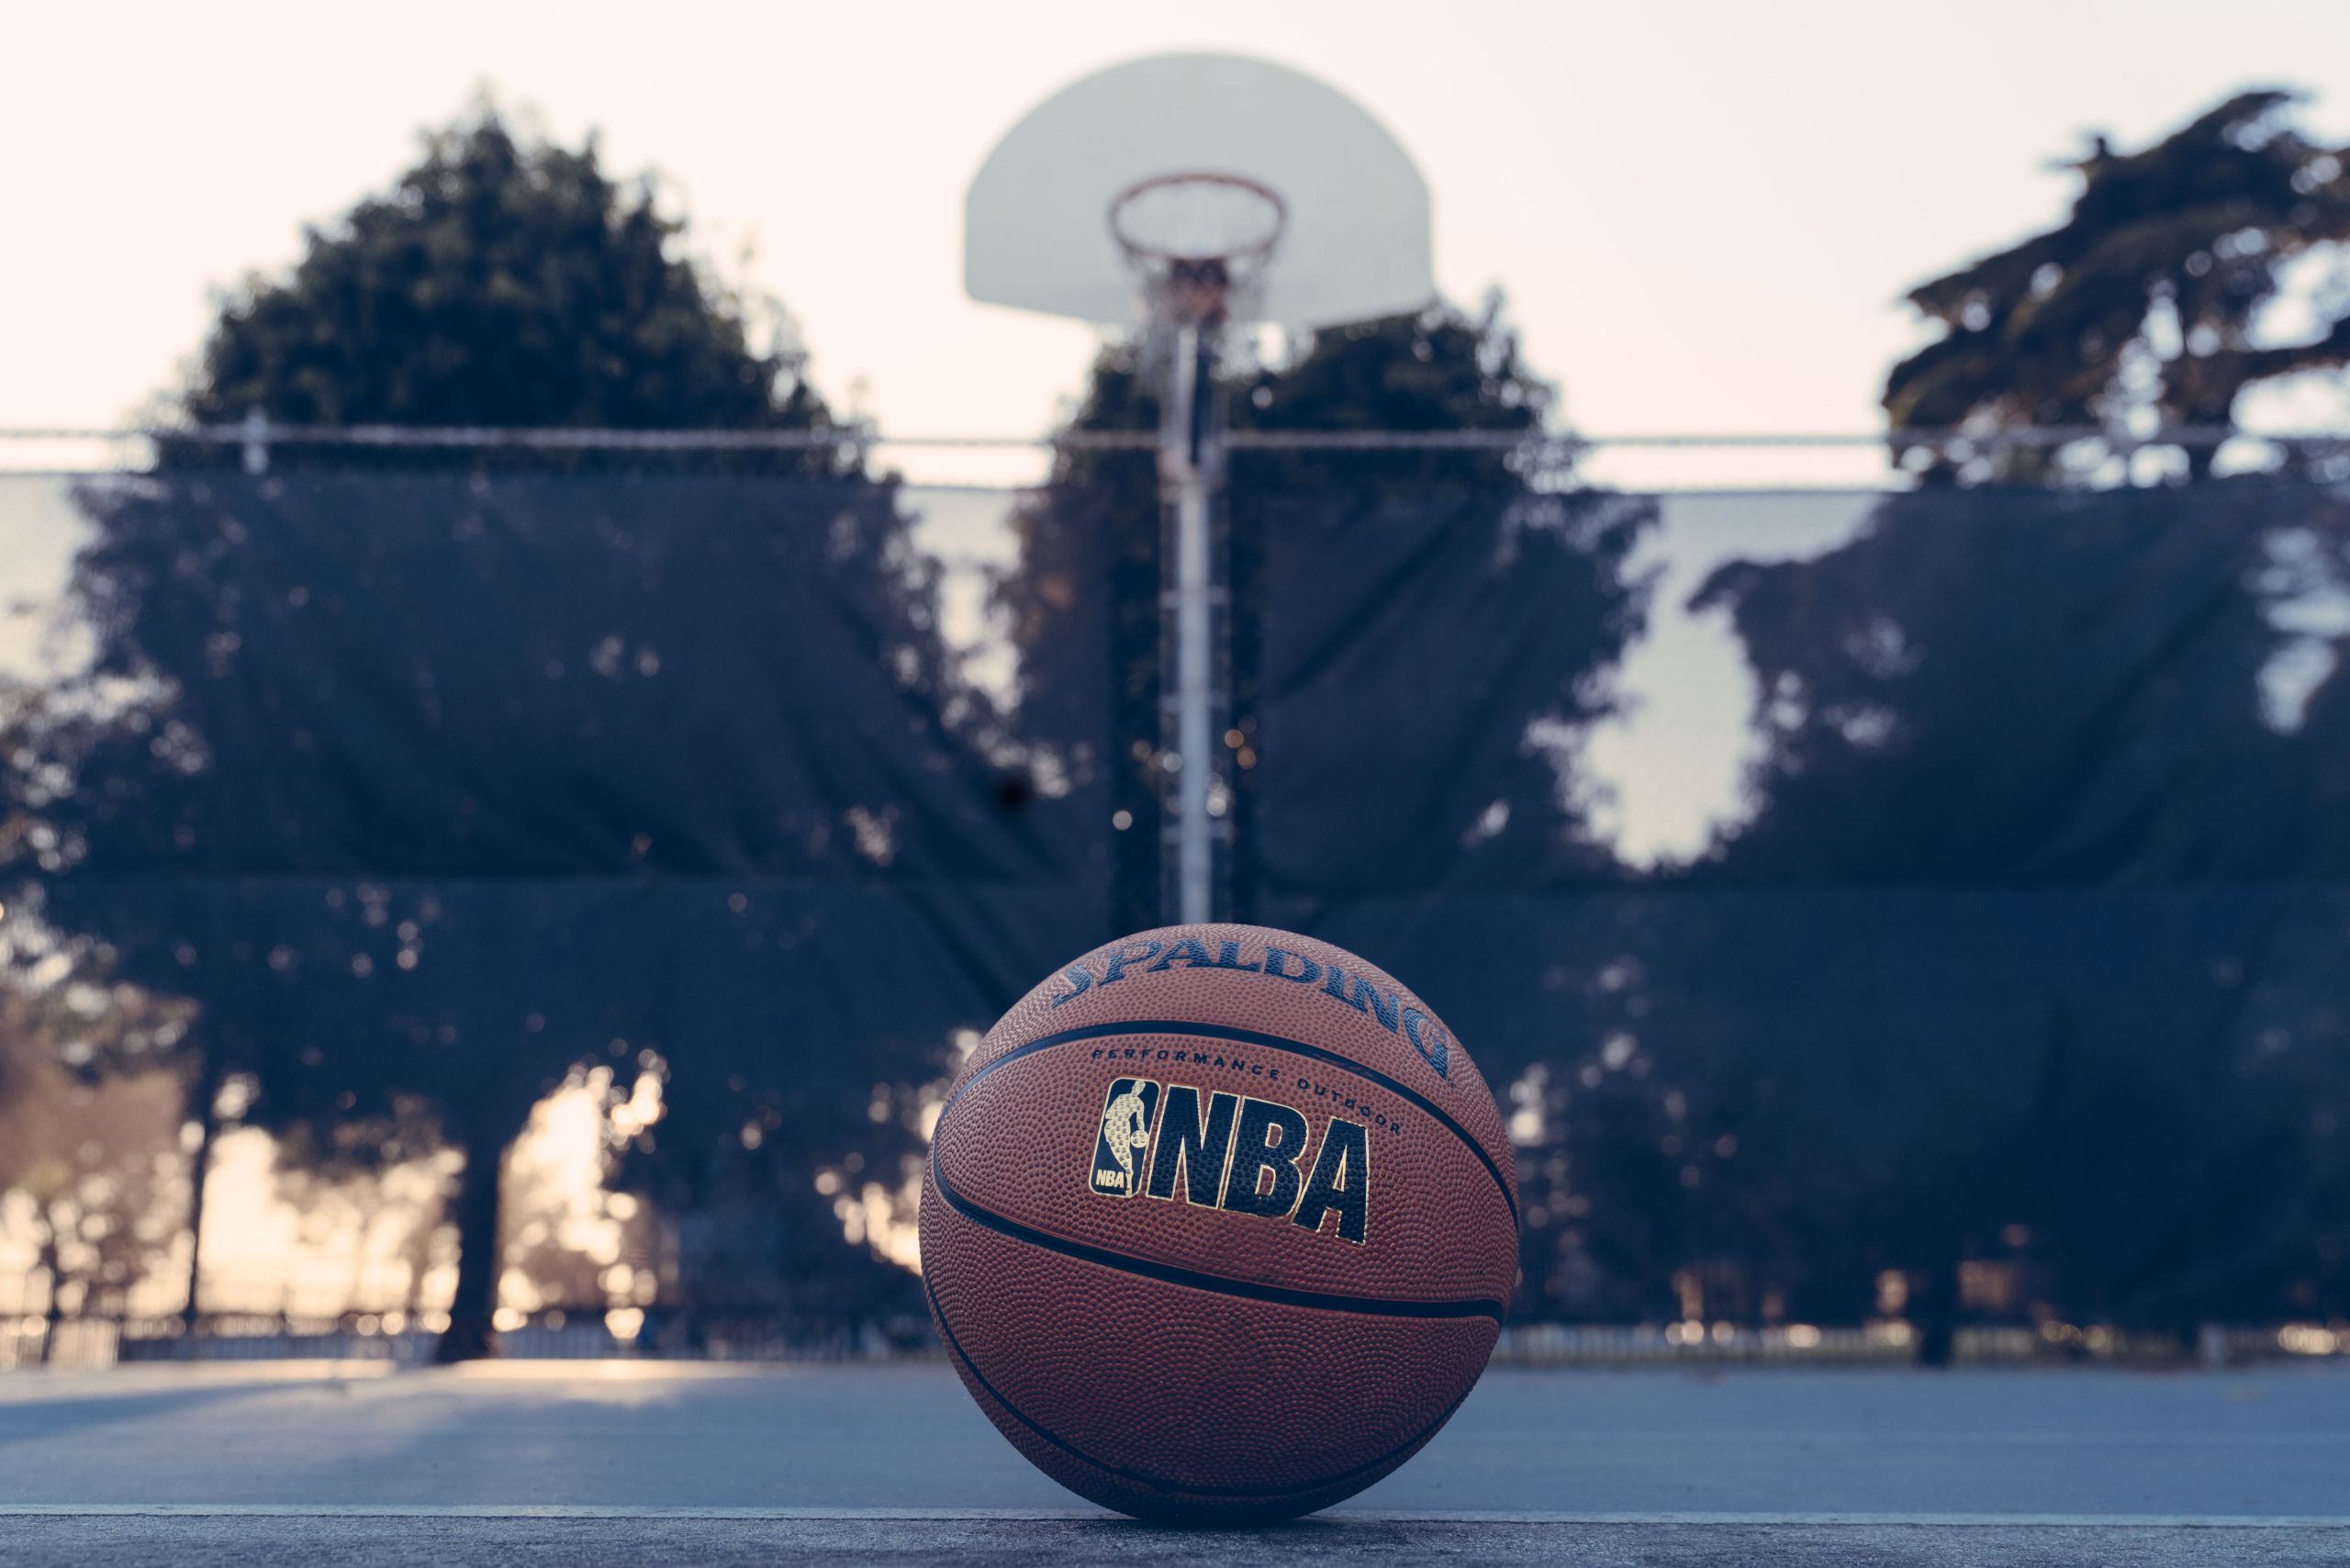 Basketball on a court. Photo by Edgar Chaparro from Unsplash.